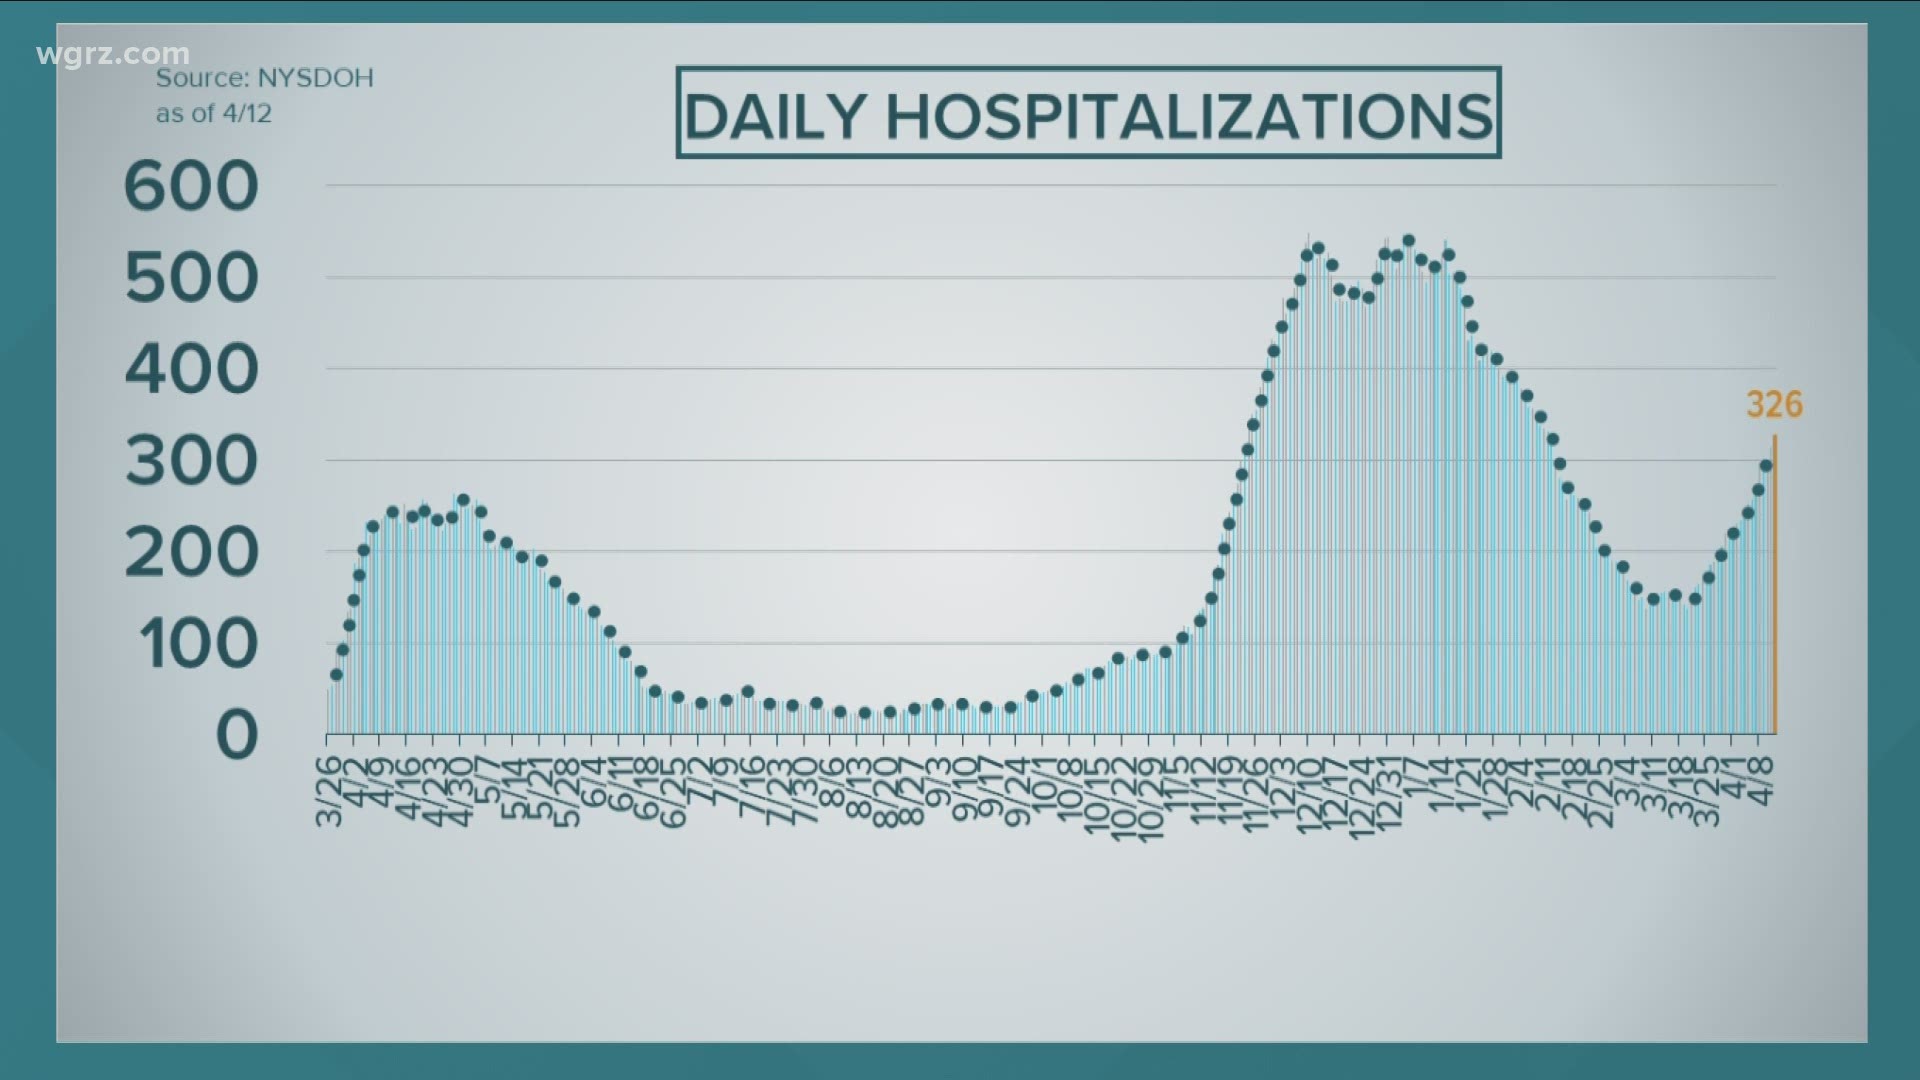 As of yesterday, there were 326 people in the hospital with COVID-19 in the WNY region. That's nearly 200 more people hospitalized than on March 20th.